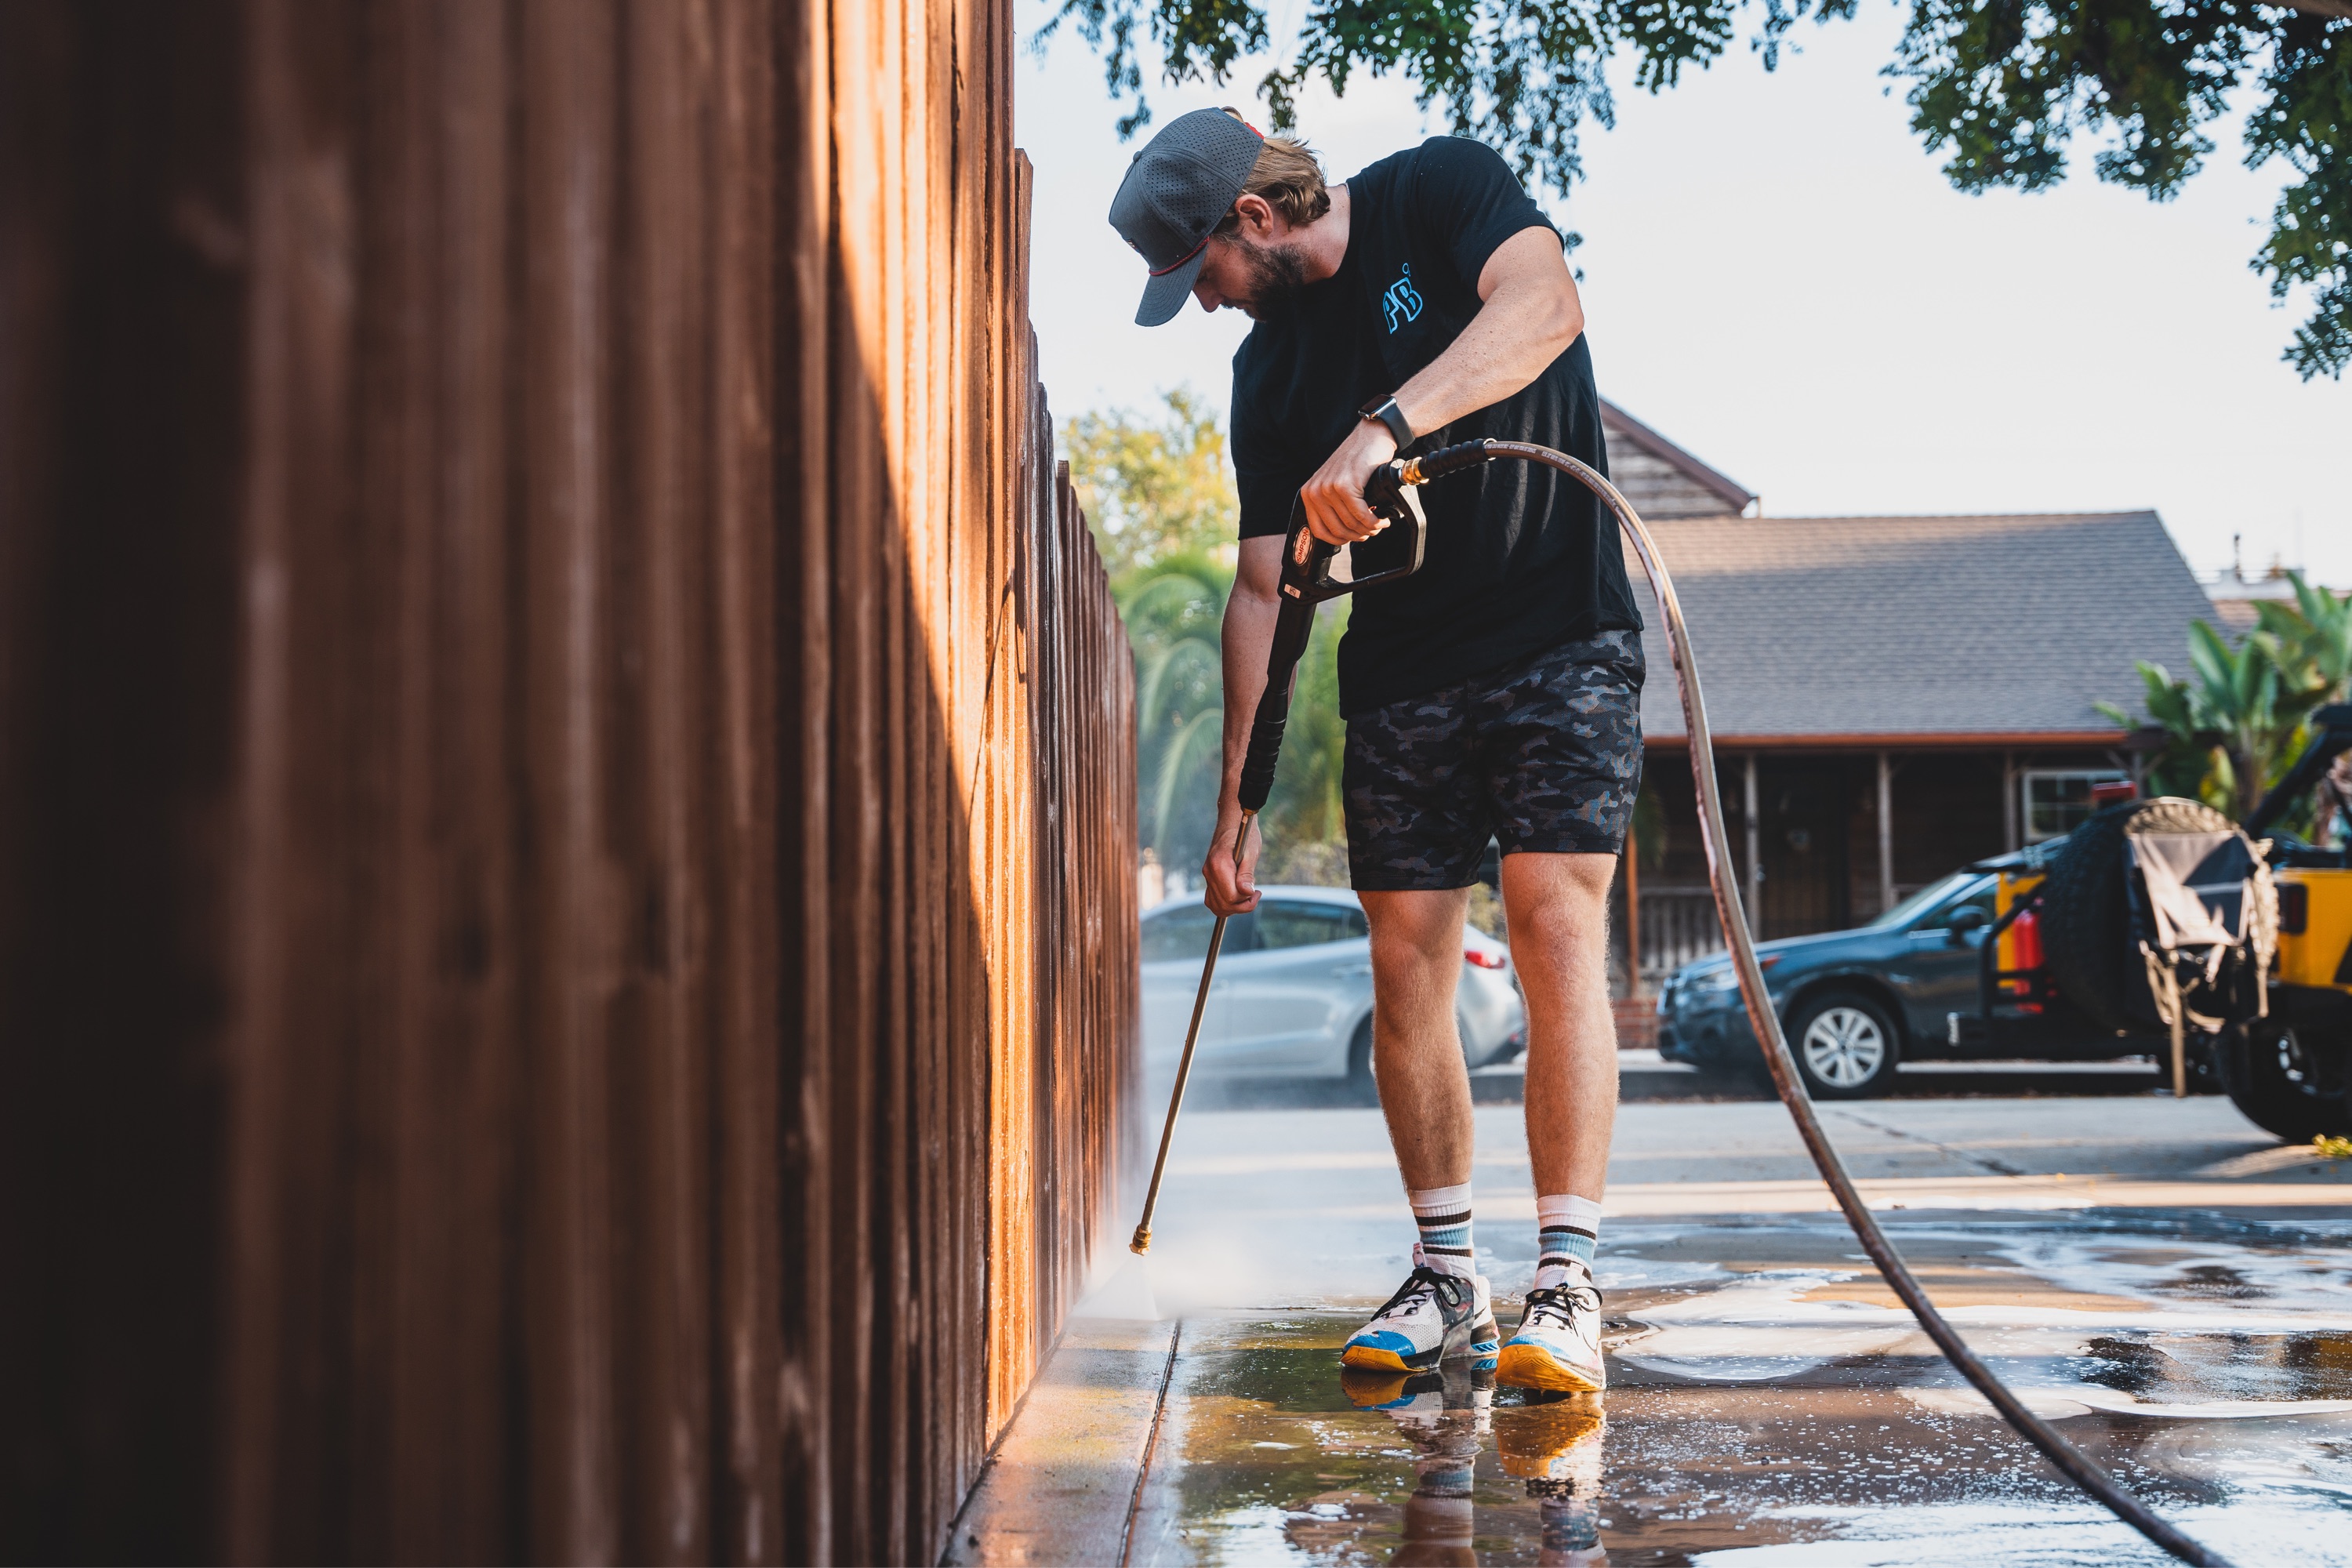 Pacific Beach Pressure Washing - Unlicensed Contractor Logo